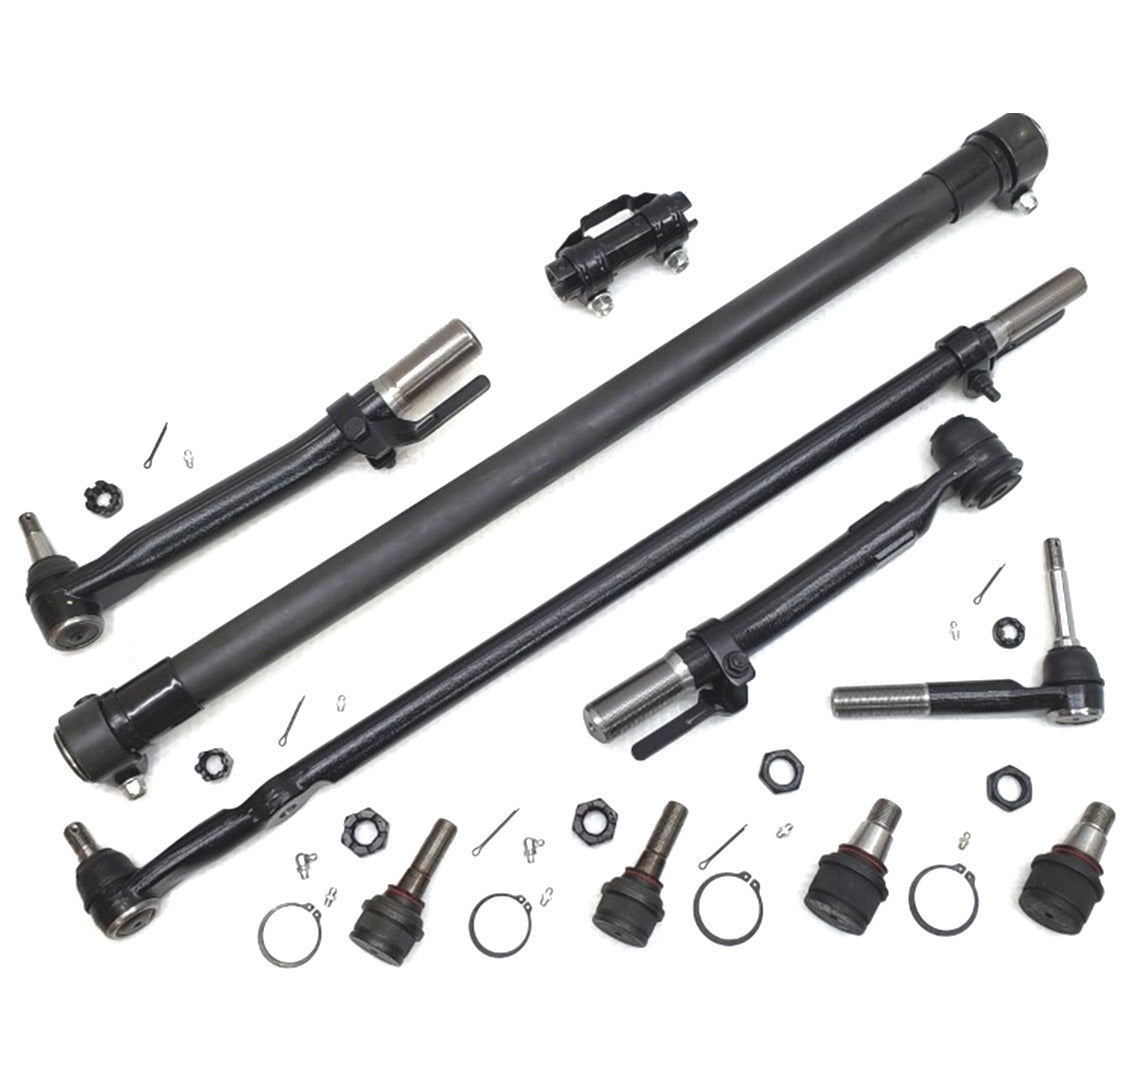 Lifetime Ball Joints Tie Rods Drag Link Sleeves Kit for 2011-2016 Ford F250, F350 4x4 SRW